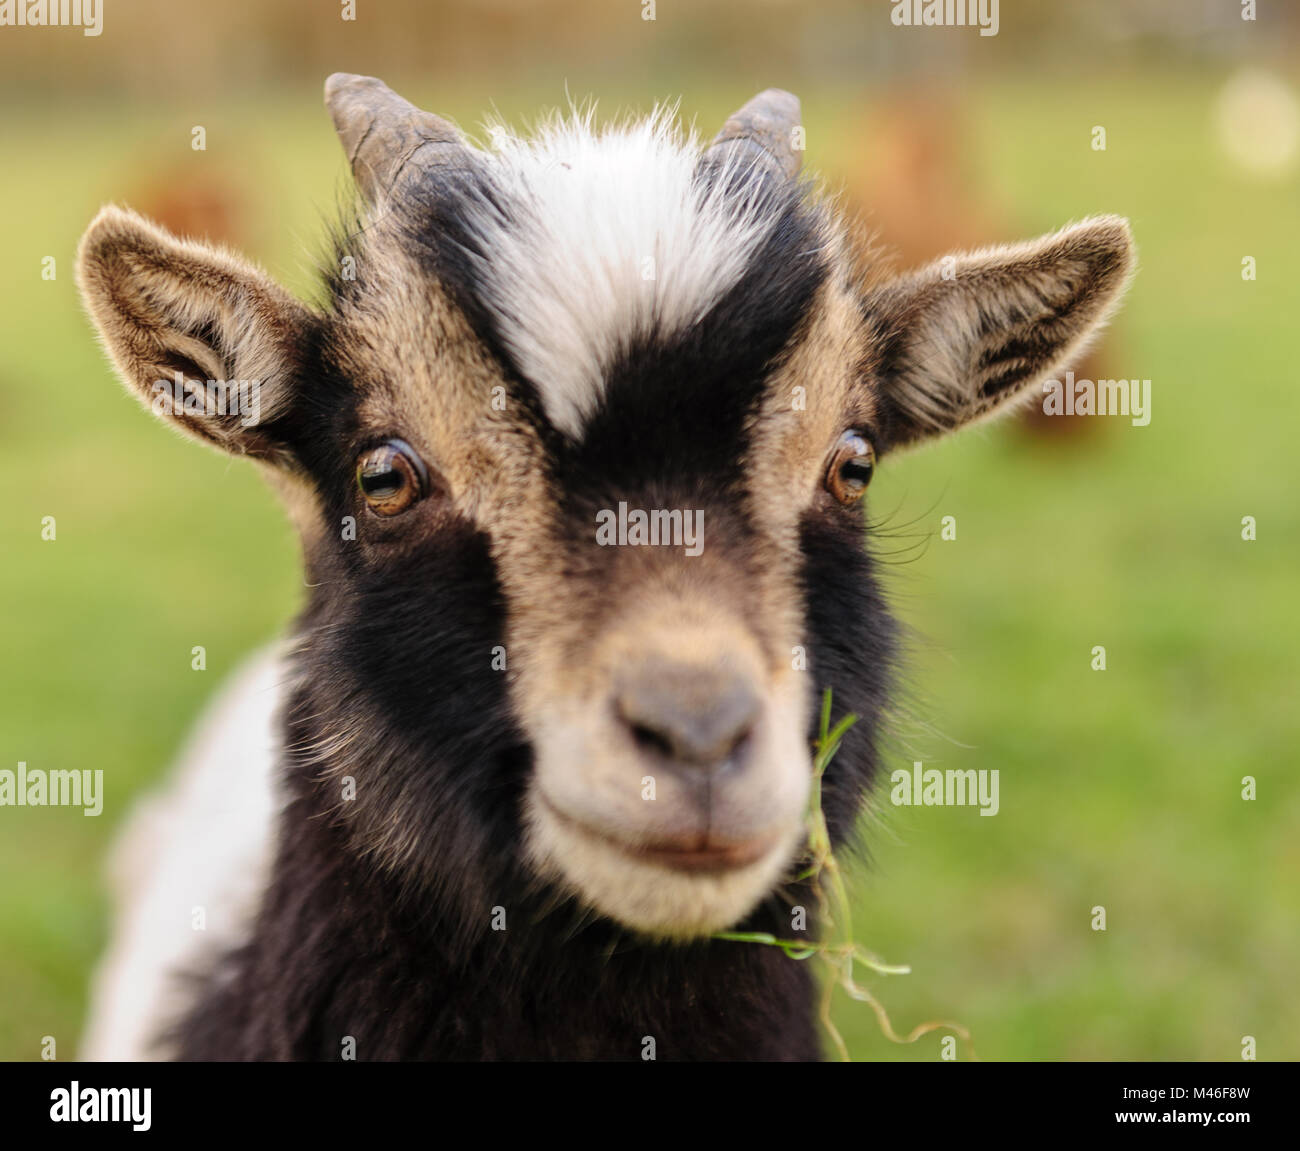 Close-up of a Goat carrying a leaf of grass Stock Photo